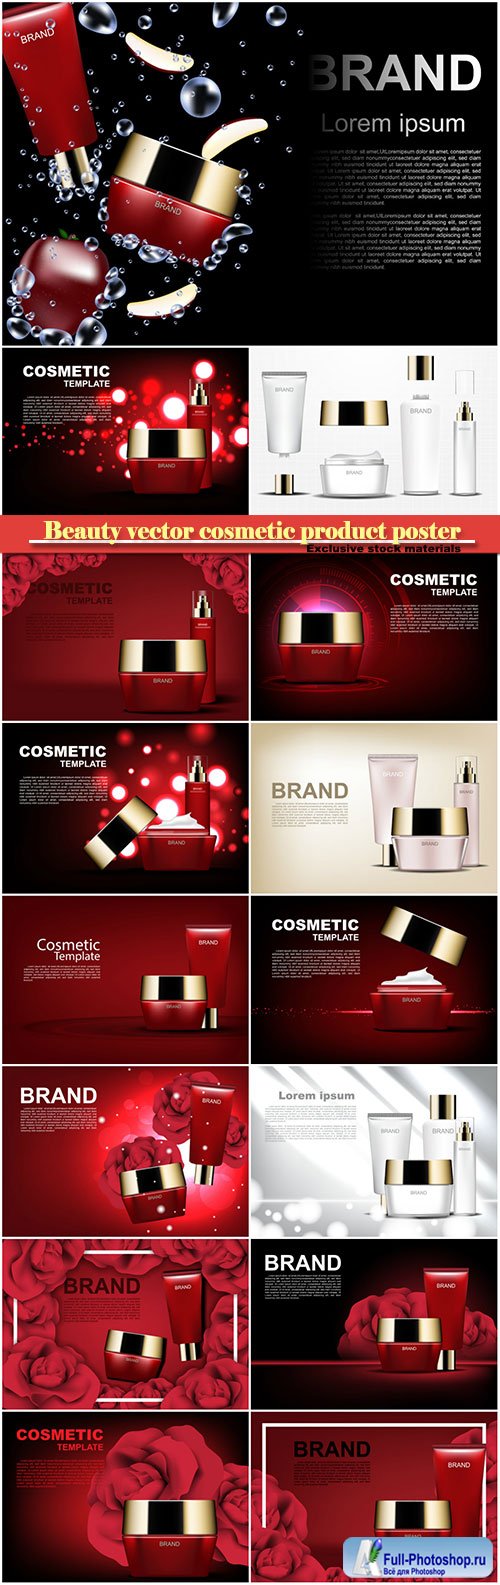 Beauty vector cosmetic product poster # 21